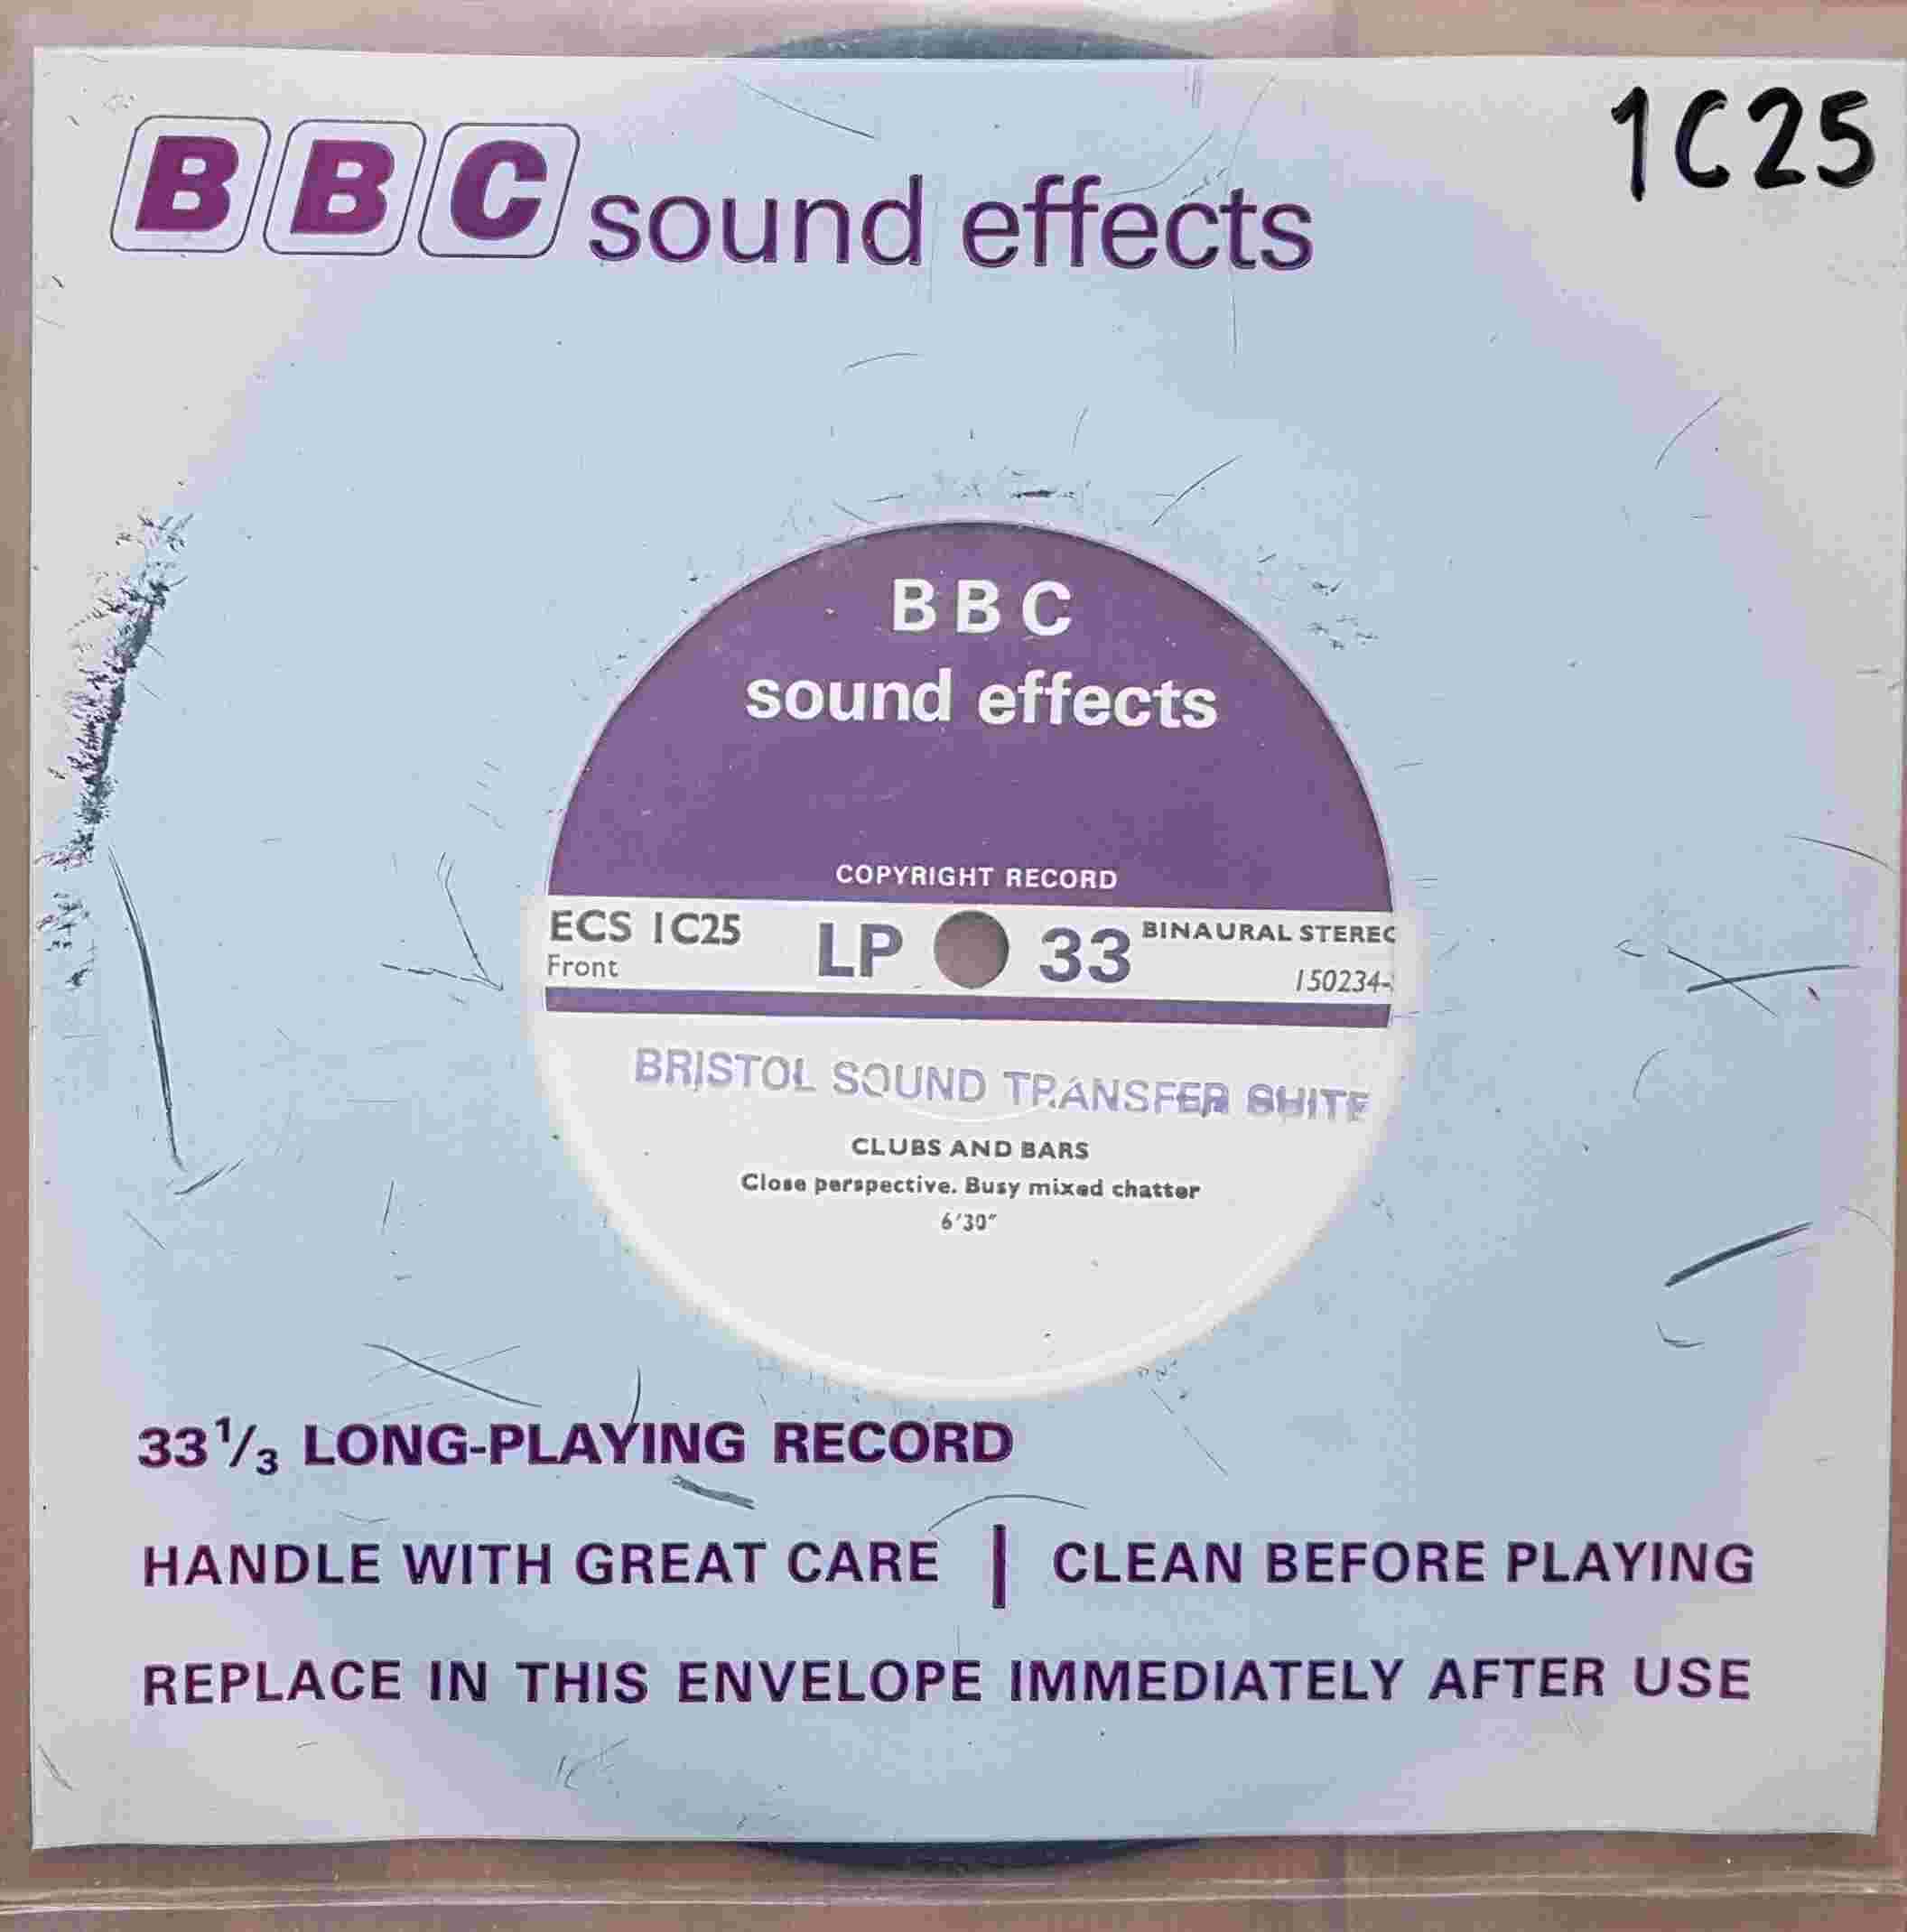 Picture of ECS 1C25 Clubs and bars by artist Not registered from the BBC records and Tapes library